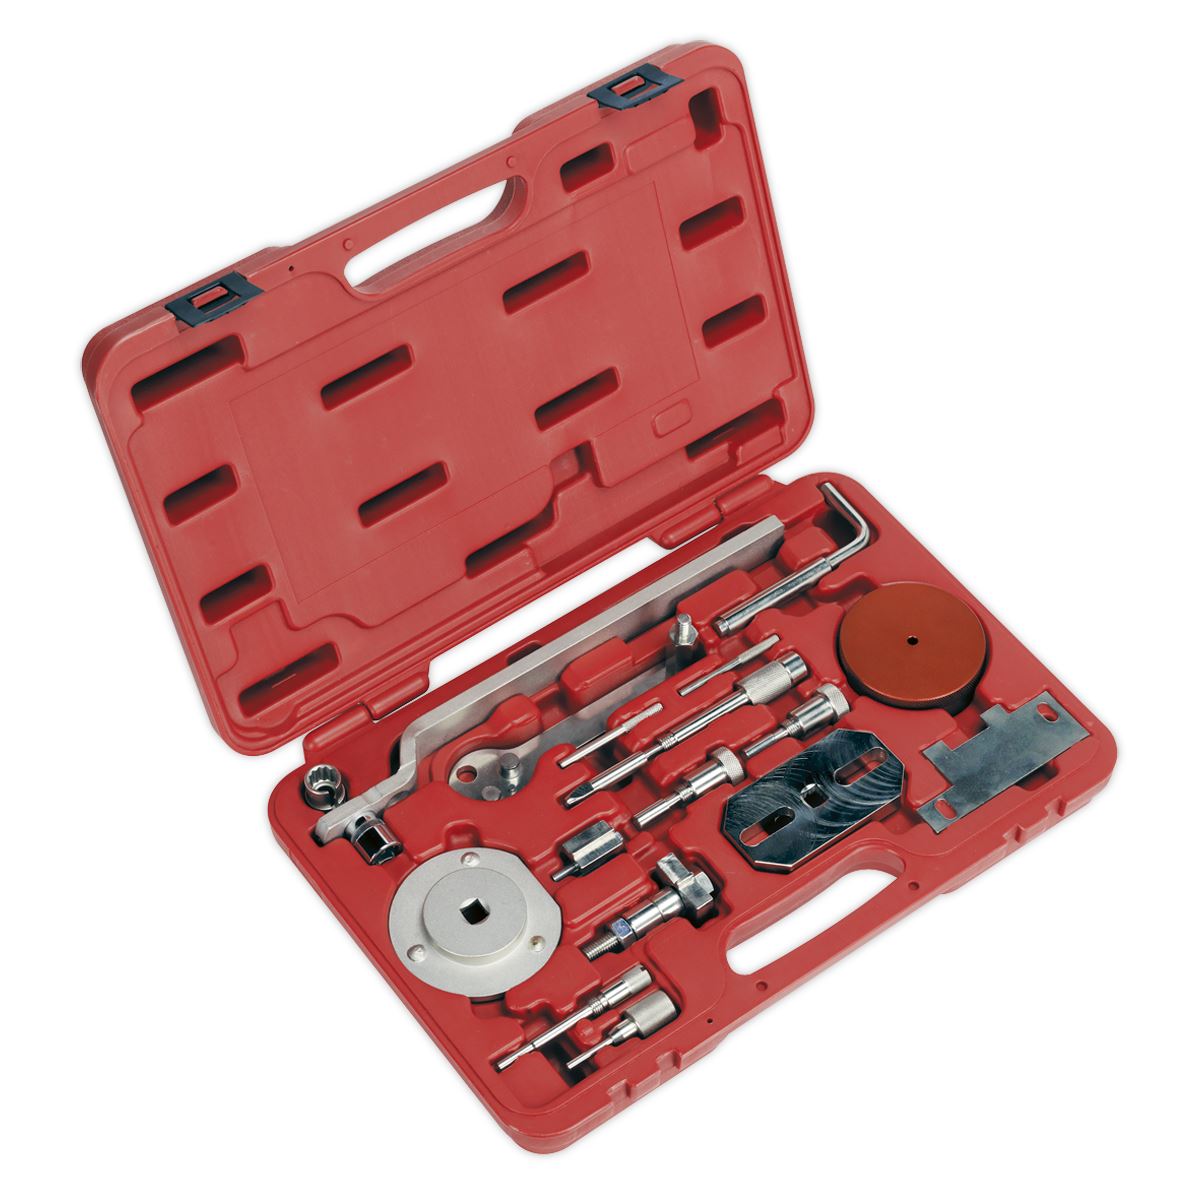 Sealey Diesel Engine Timing Tool Kit for Fiat, Ford, Iveco, PSA - 2.2D, 2.3D, 3.0D - Belt/Chain Drive